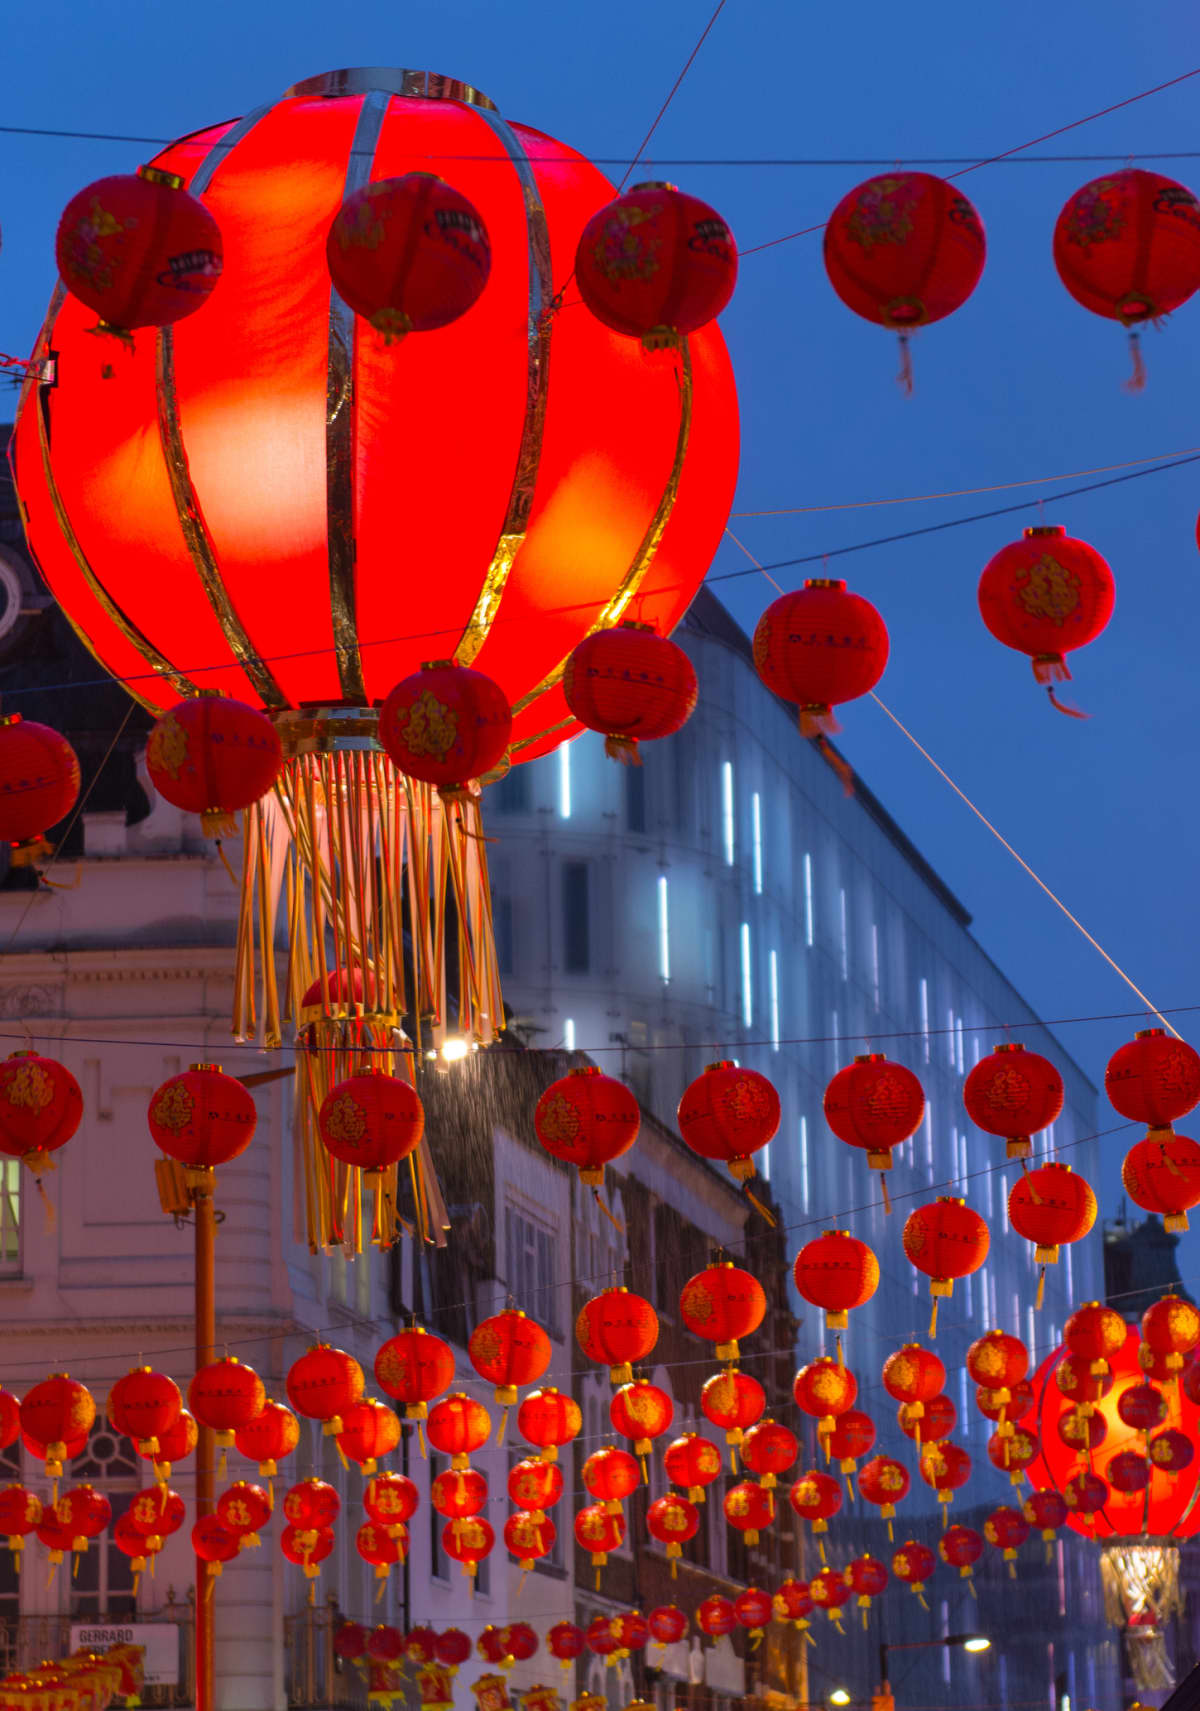 Illuminated Chinese lanterns hang in London's China Town to celebrate the Chinese New Year. The colour red (fire) traditionally symbolises good fortune and joy.